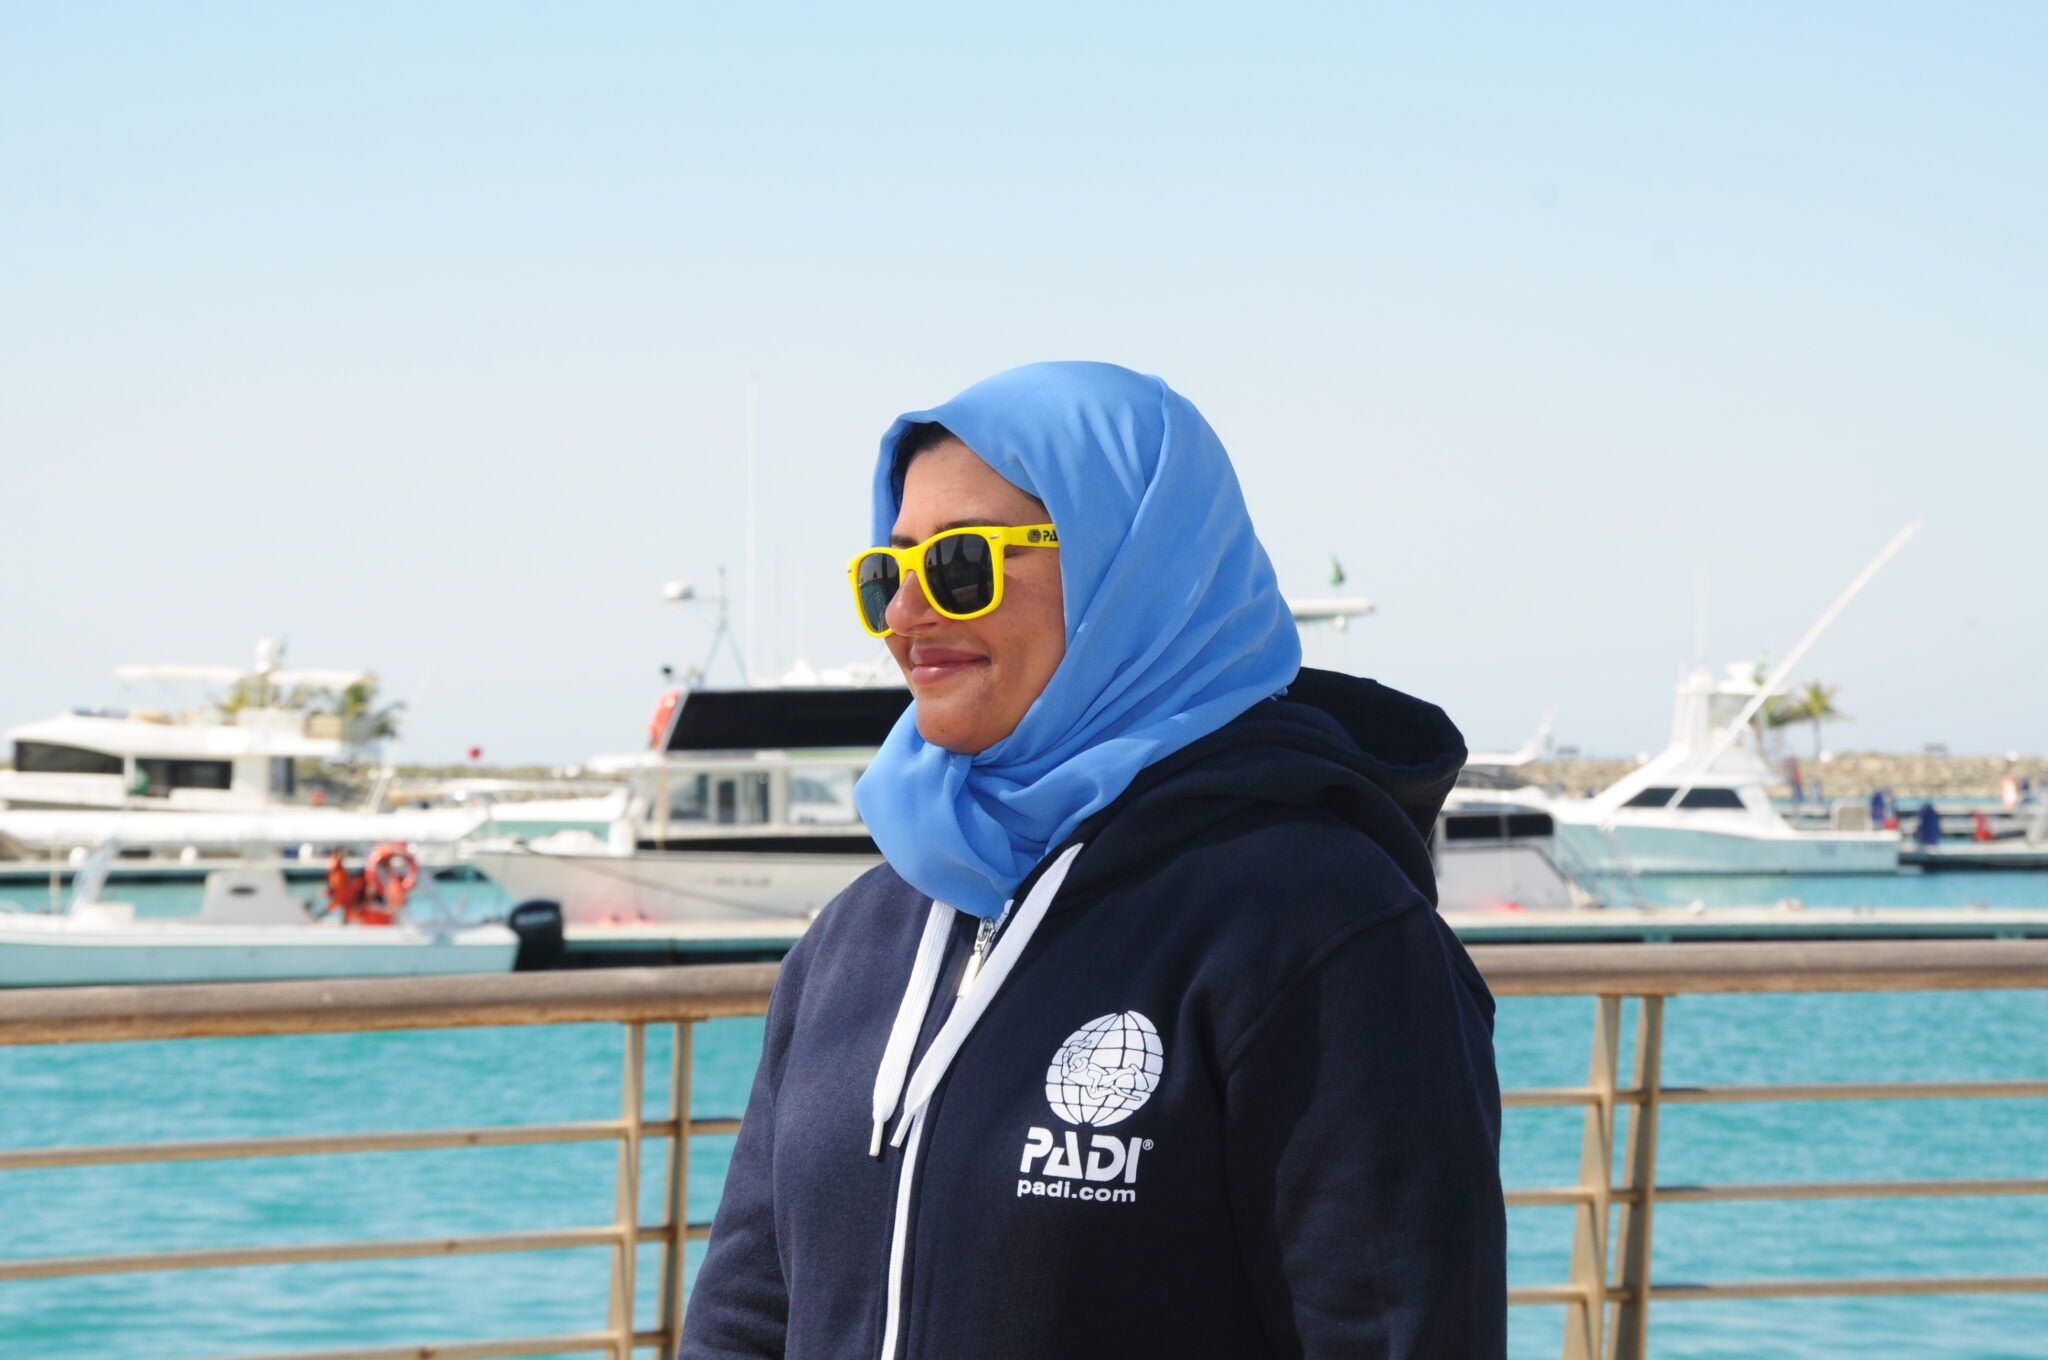 A female diver wears a PADI jacket and a headscarf.